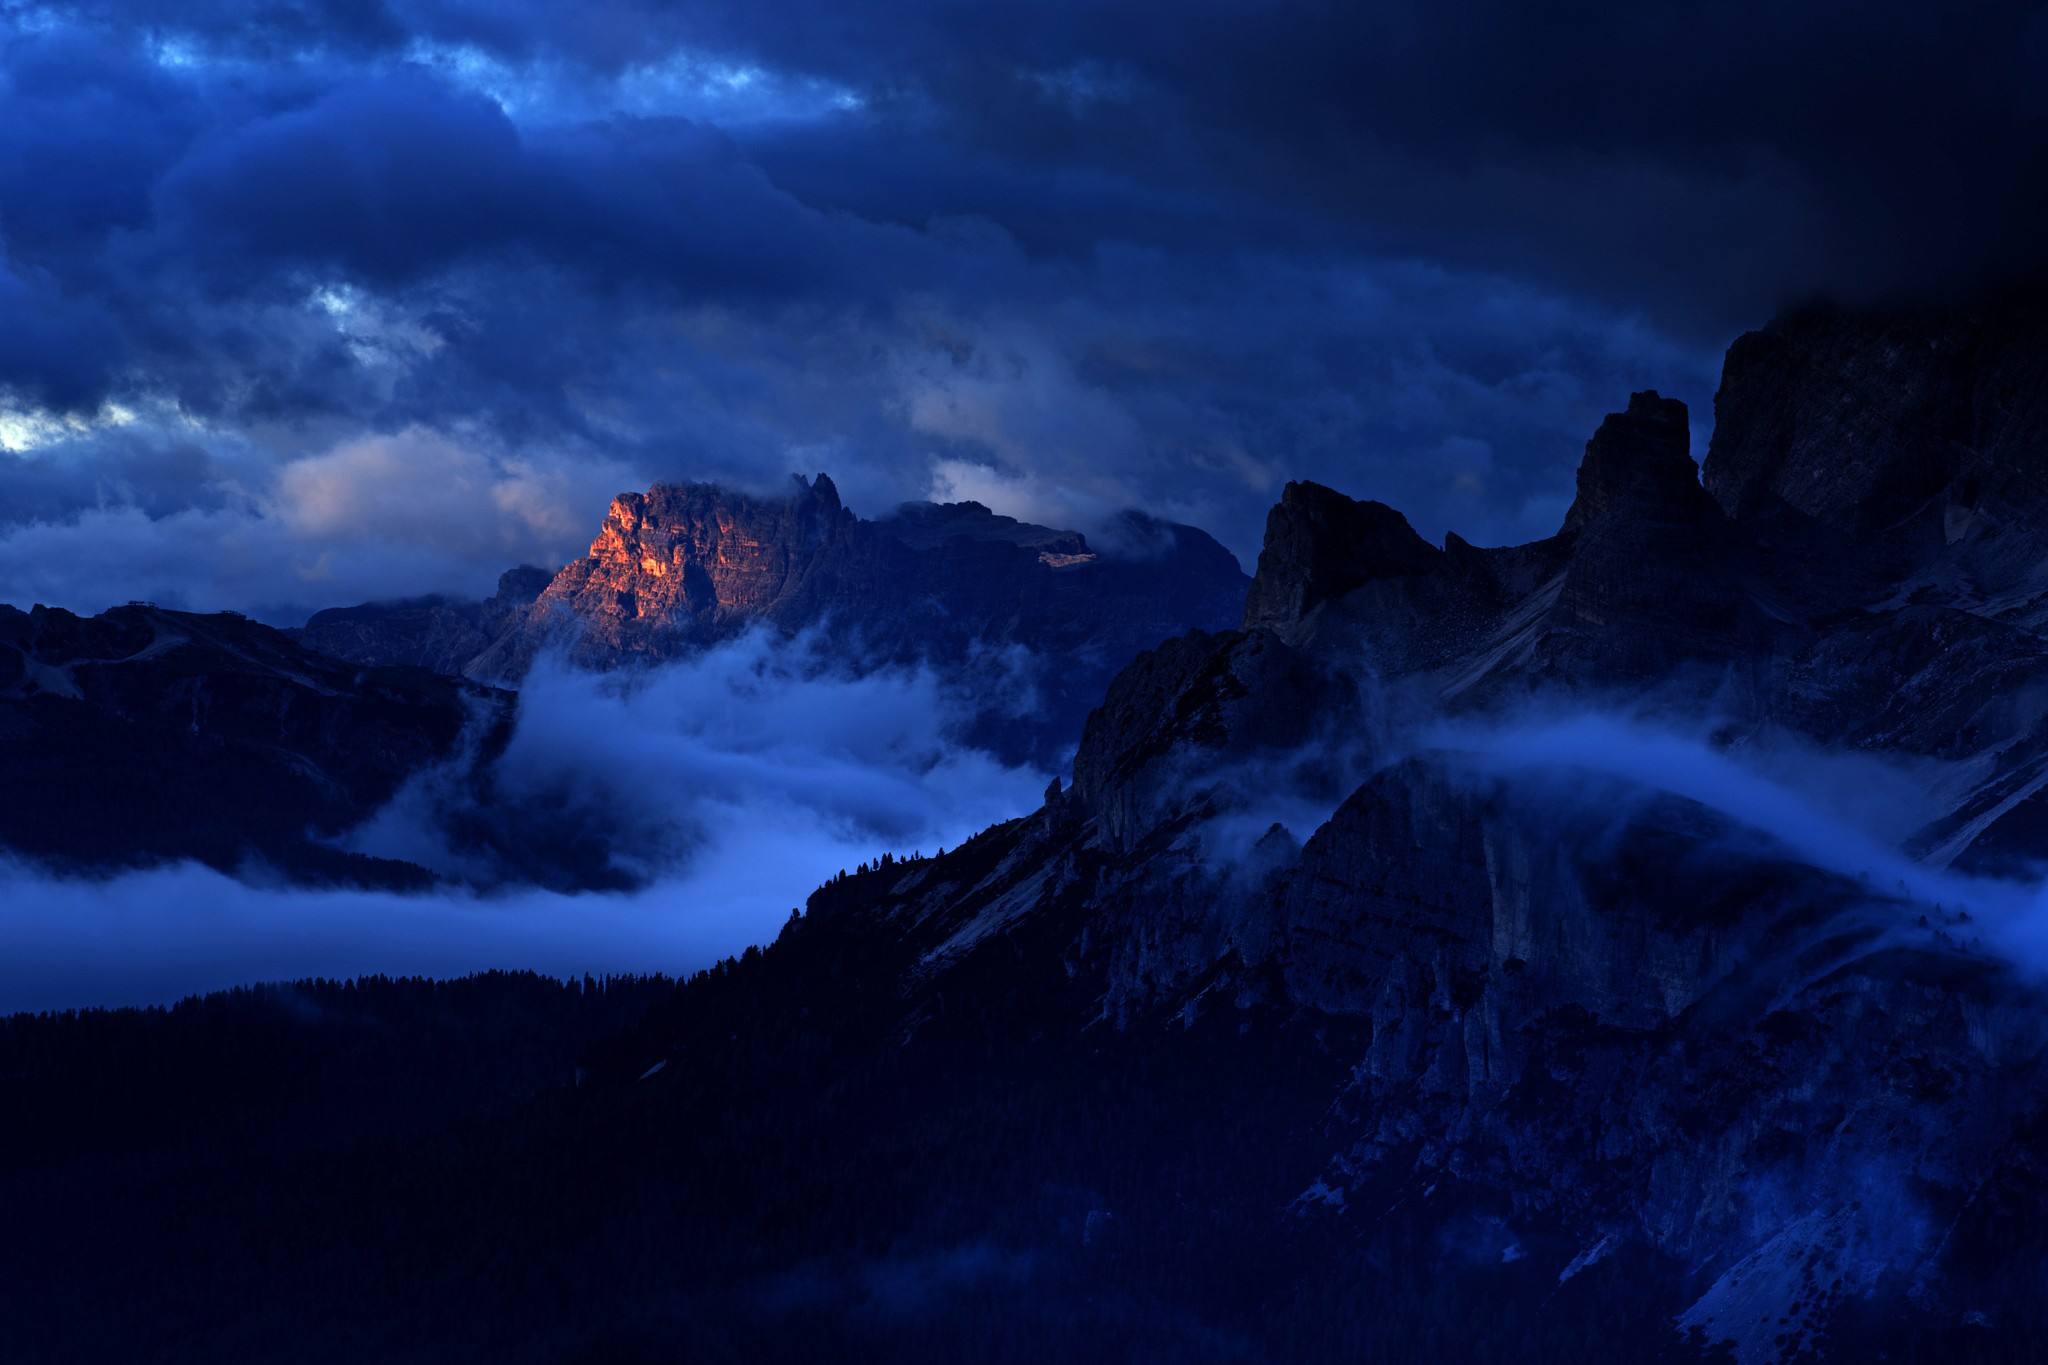 General 2048x1365 Italy Dolomites nature mountains dark sky landscape clouds low light